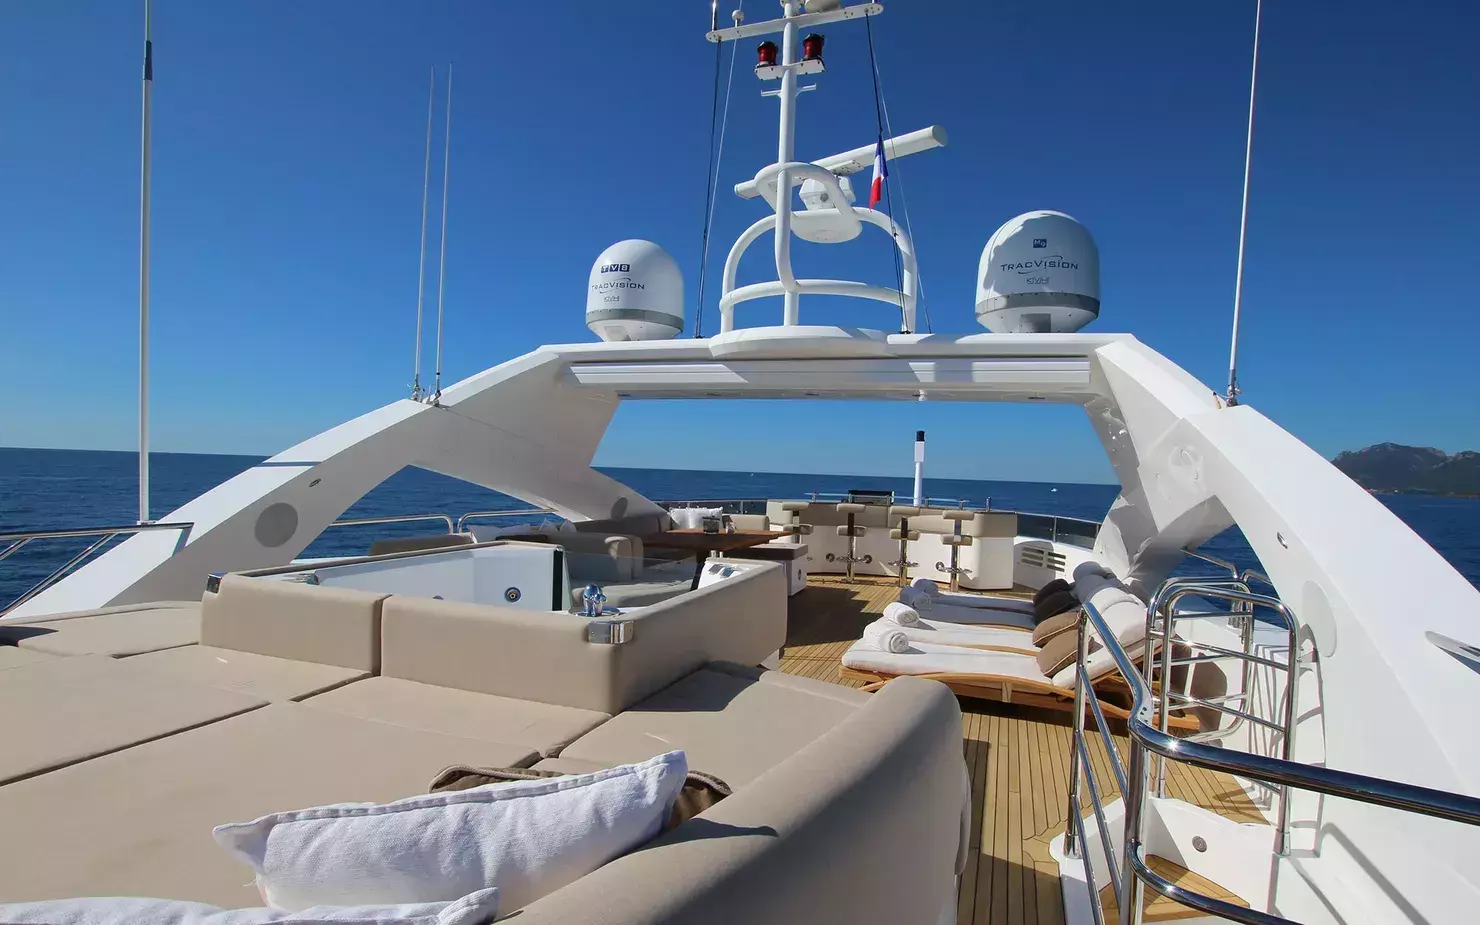 Lusia M by Sunseeker - Special Offer for a private Superyacht Charter in St Tropez with a crew